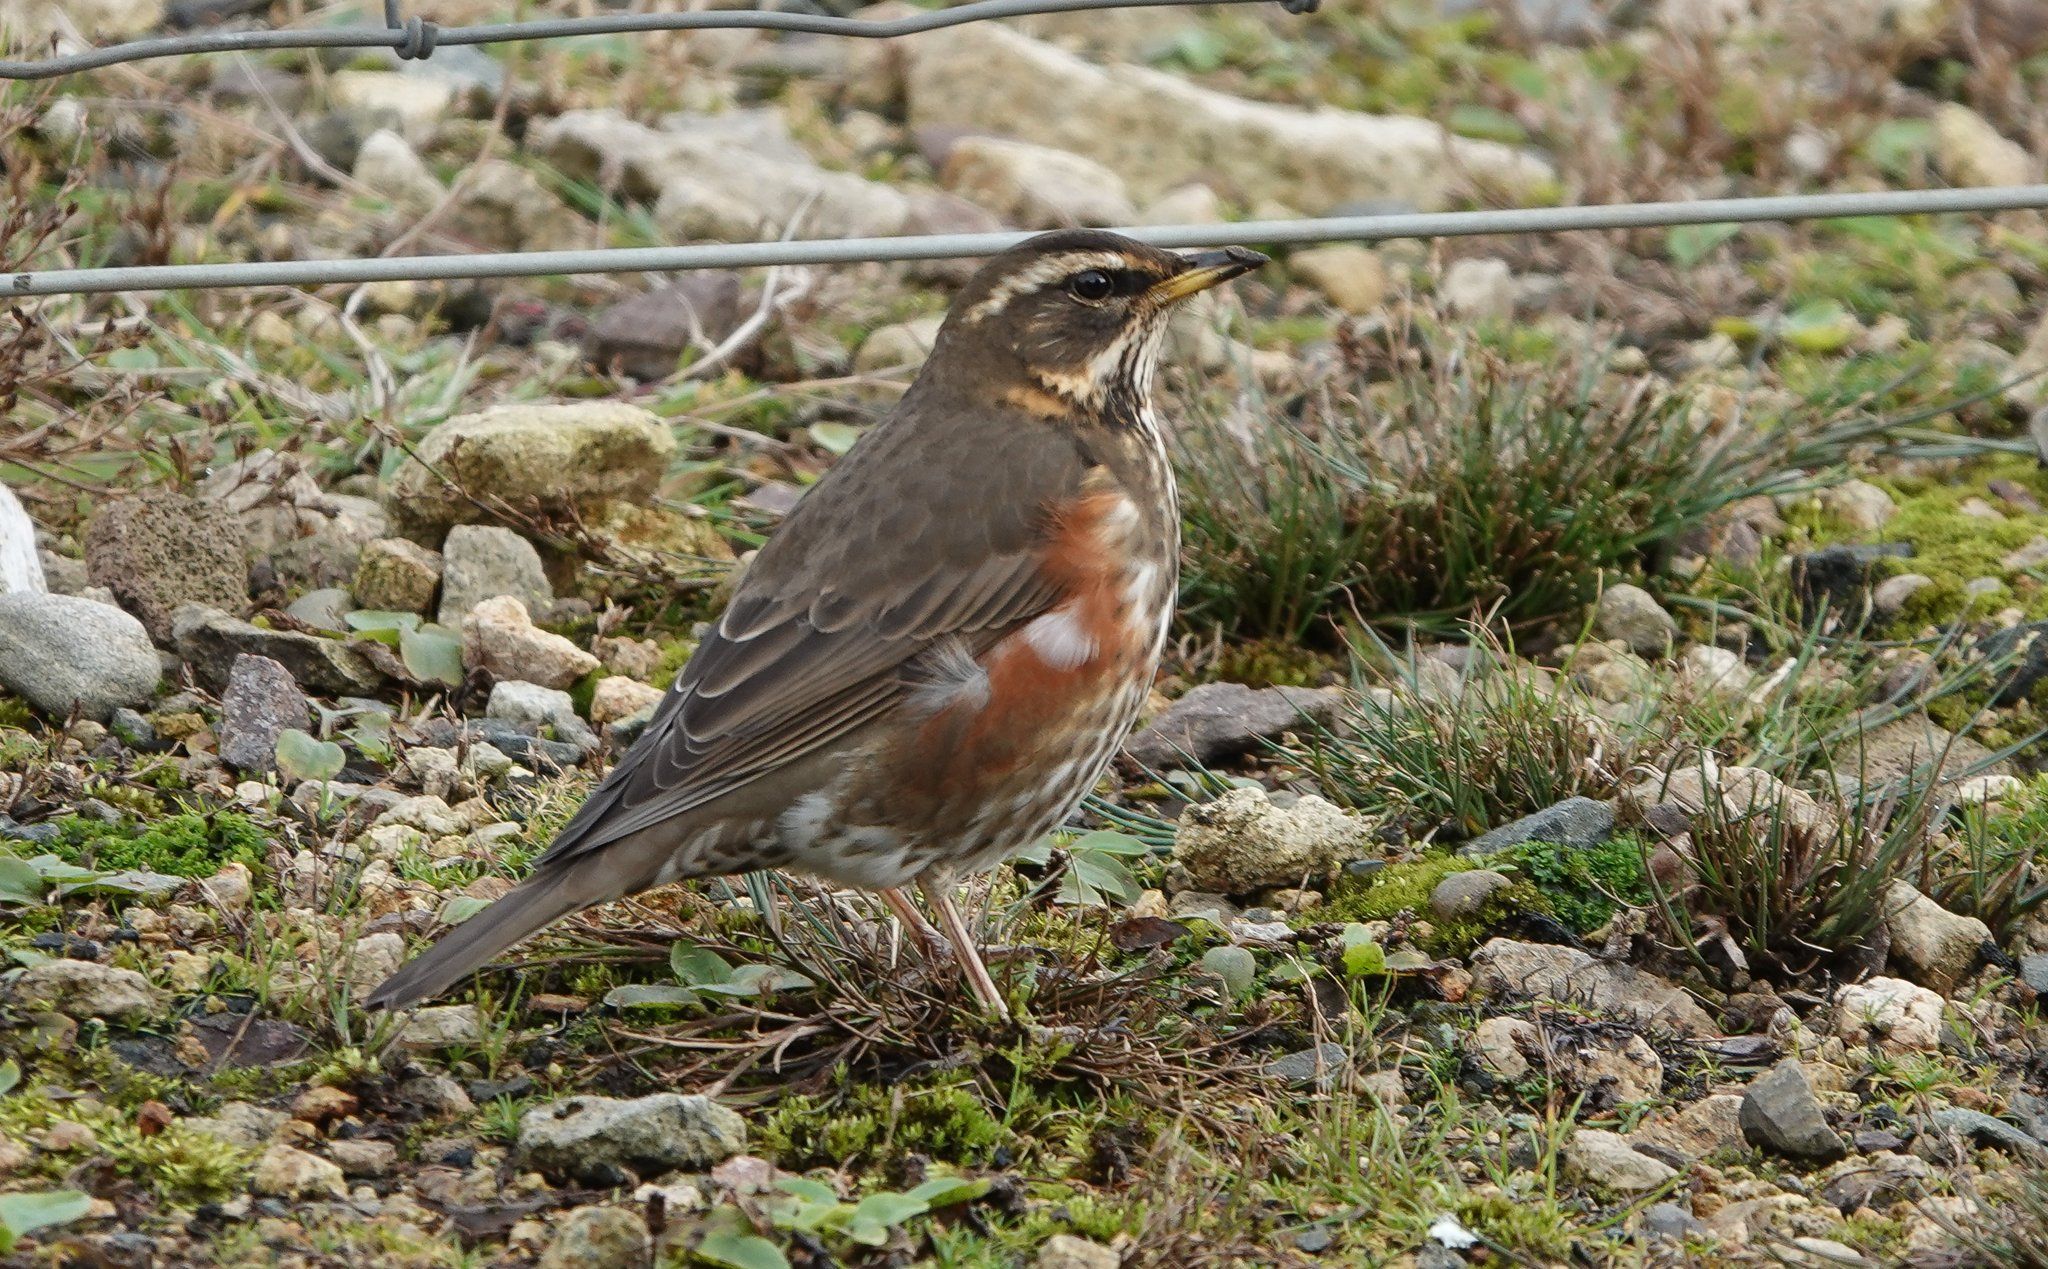 FÁILTE: The newly-arrived redwing has been feasting on holly berries